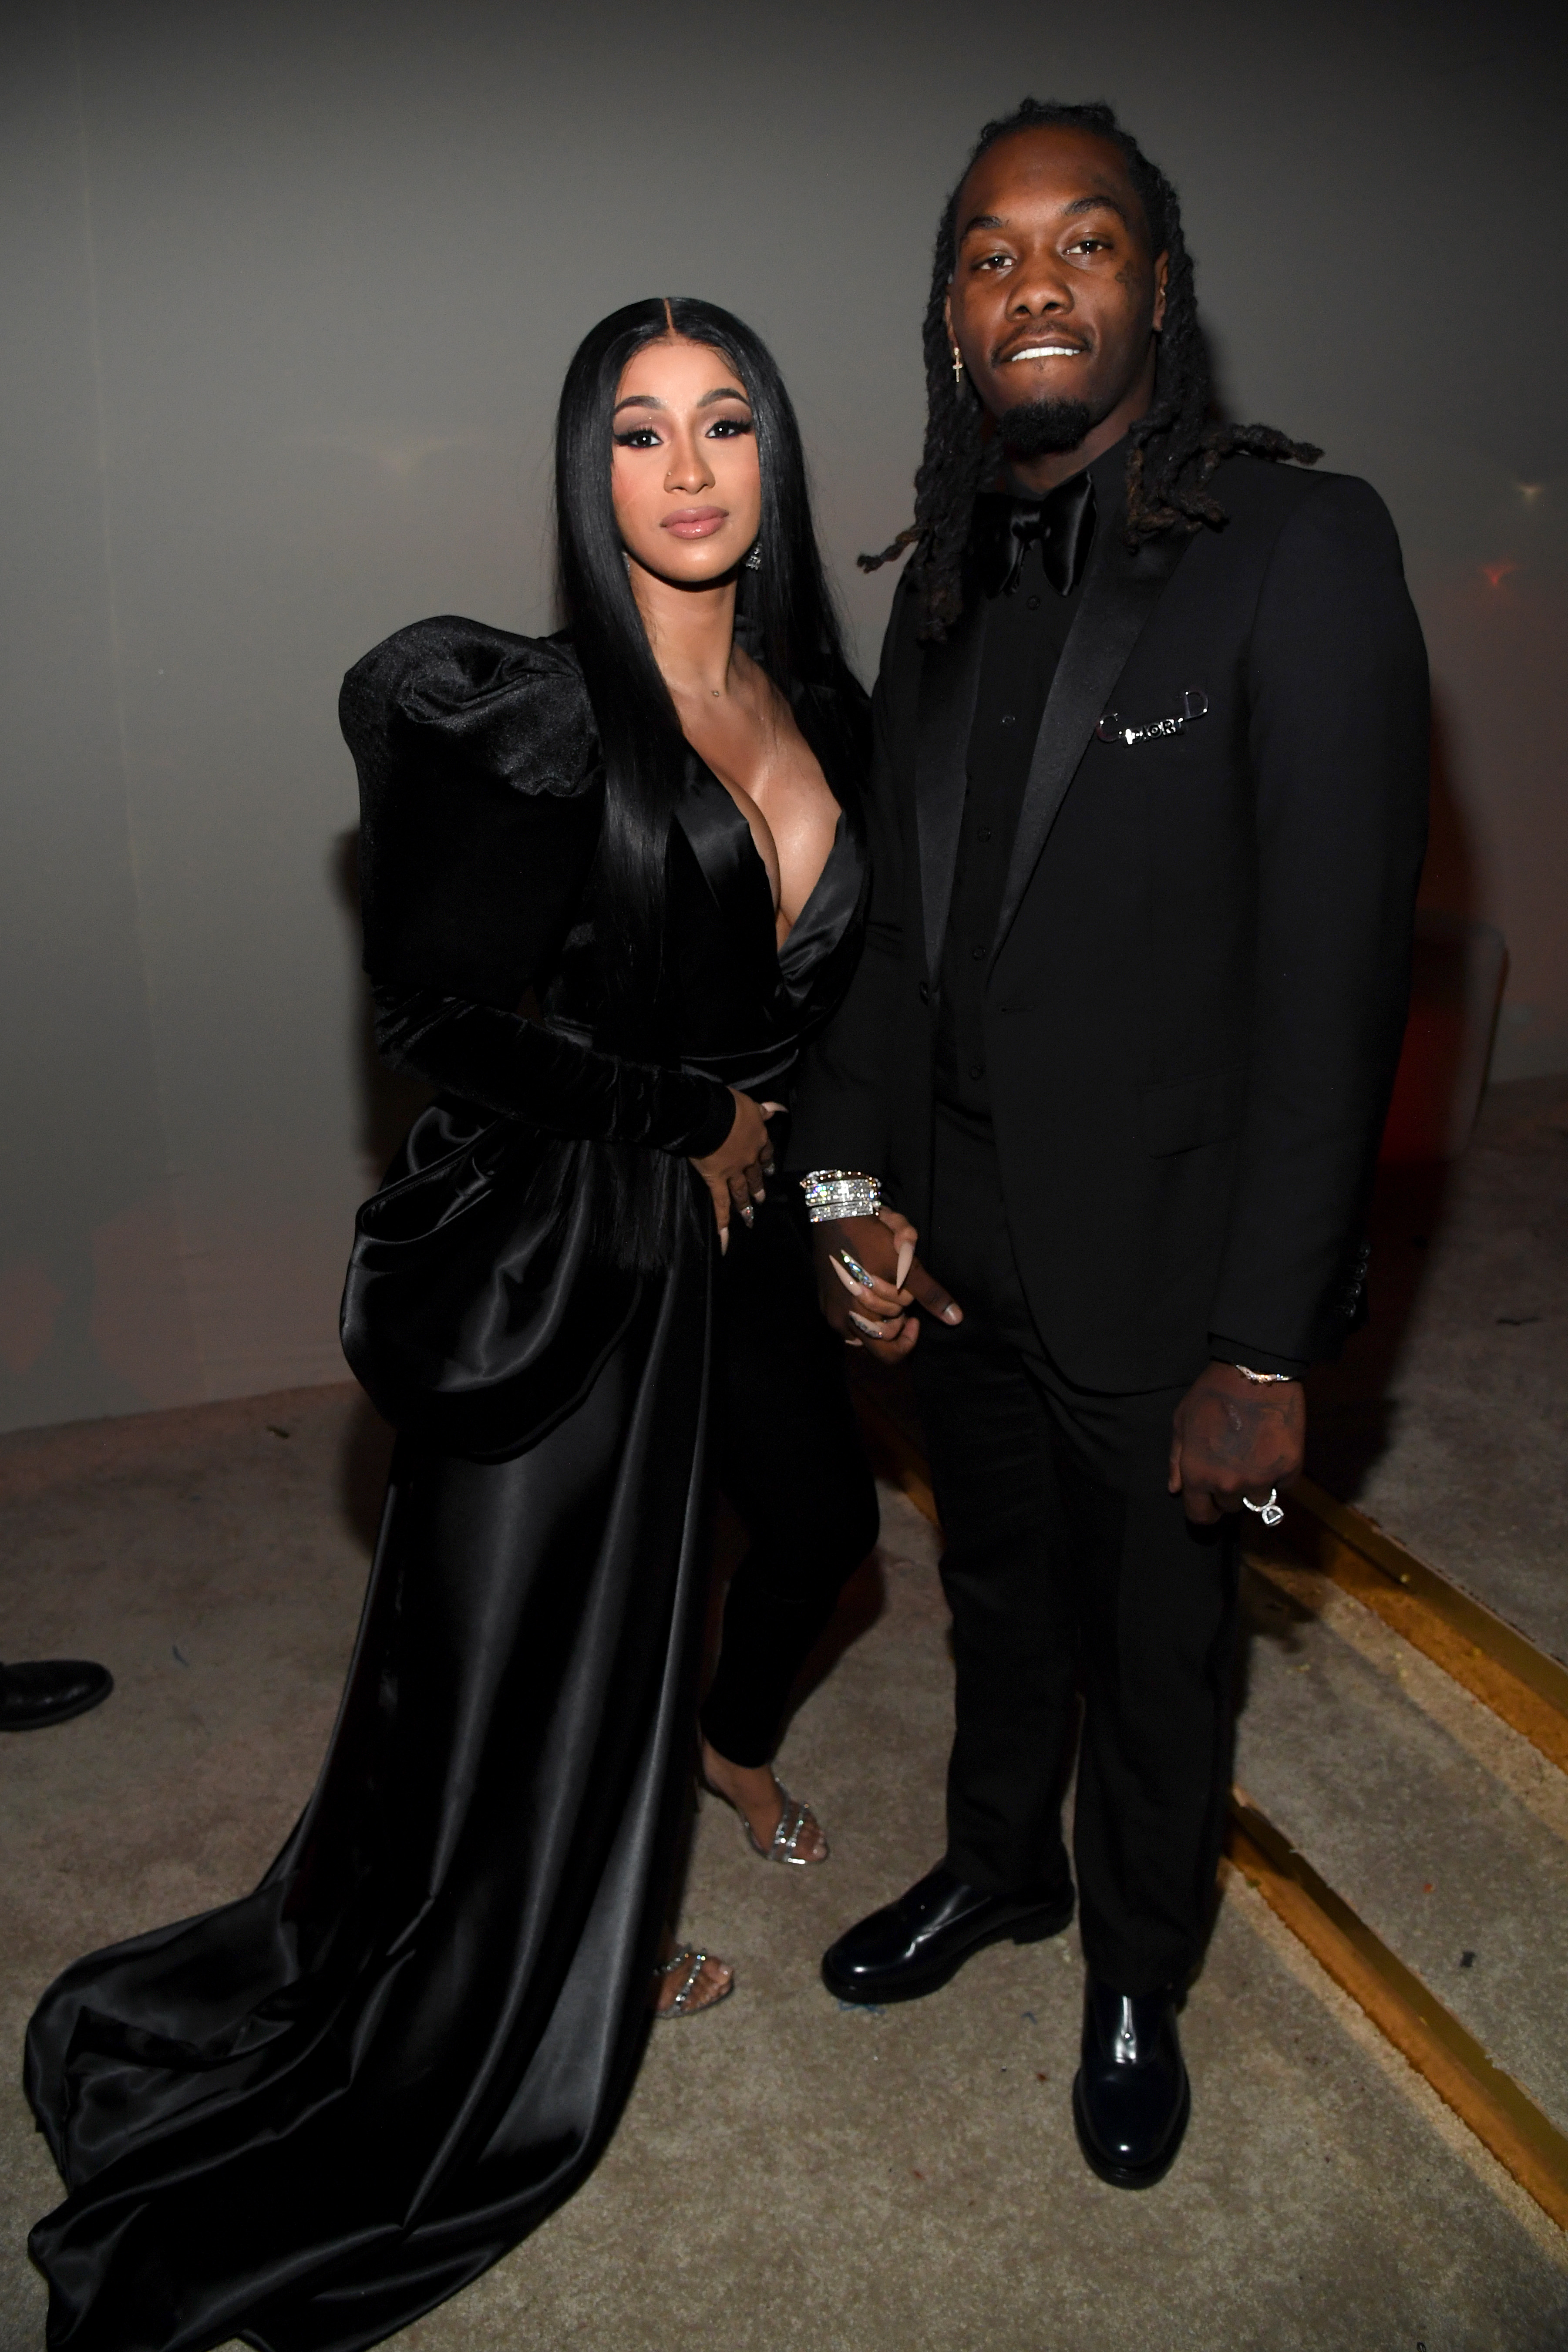 Cardi B shares her two children with Migos rapper Offset